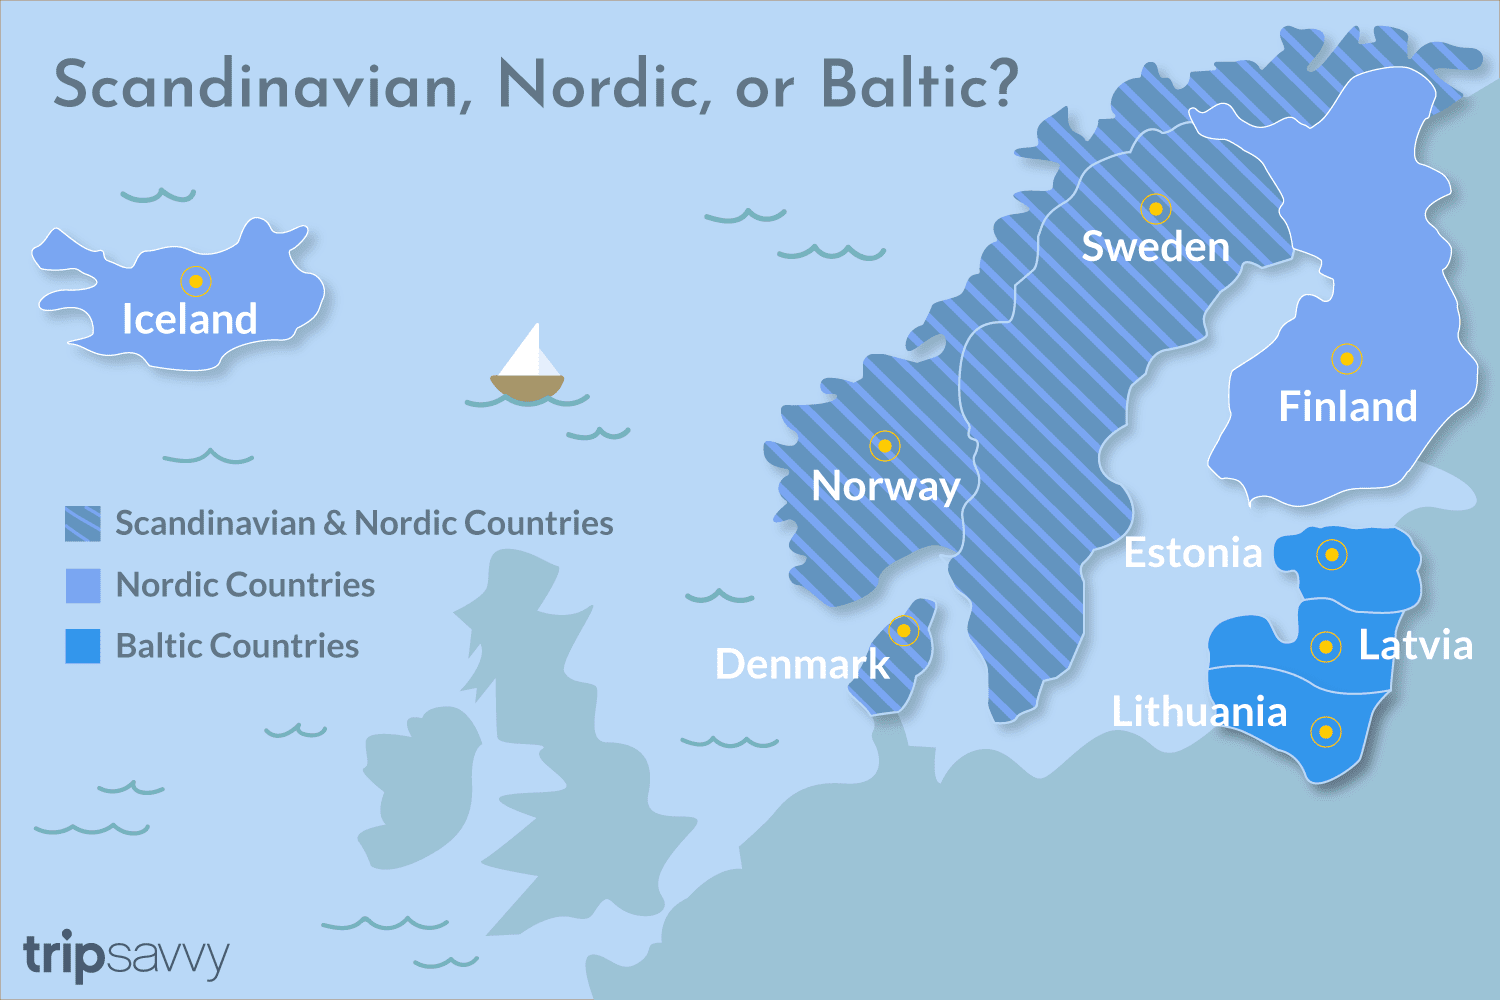 difference-between-scandinavian-and-nordic-1626695-FINAL1-5c0009d546e0fb002608945f.png